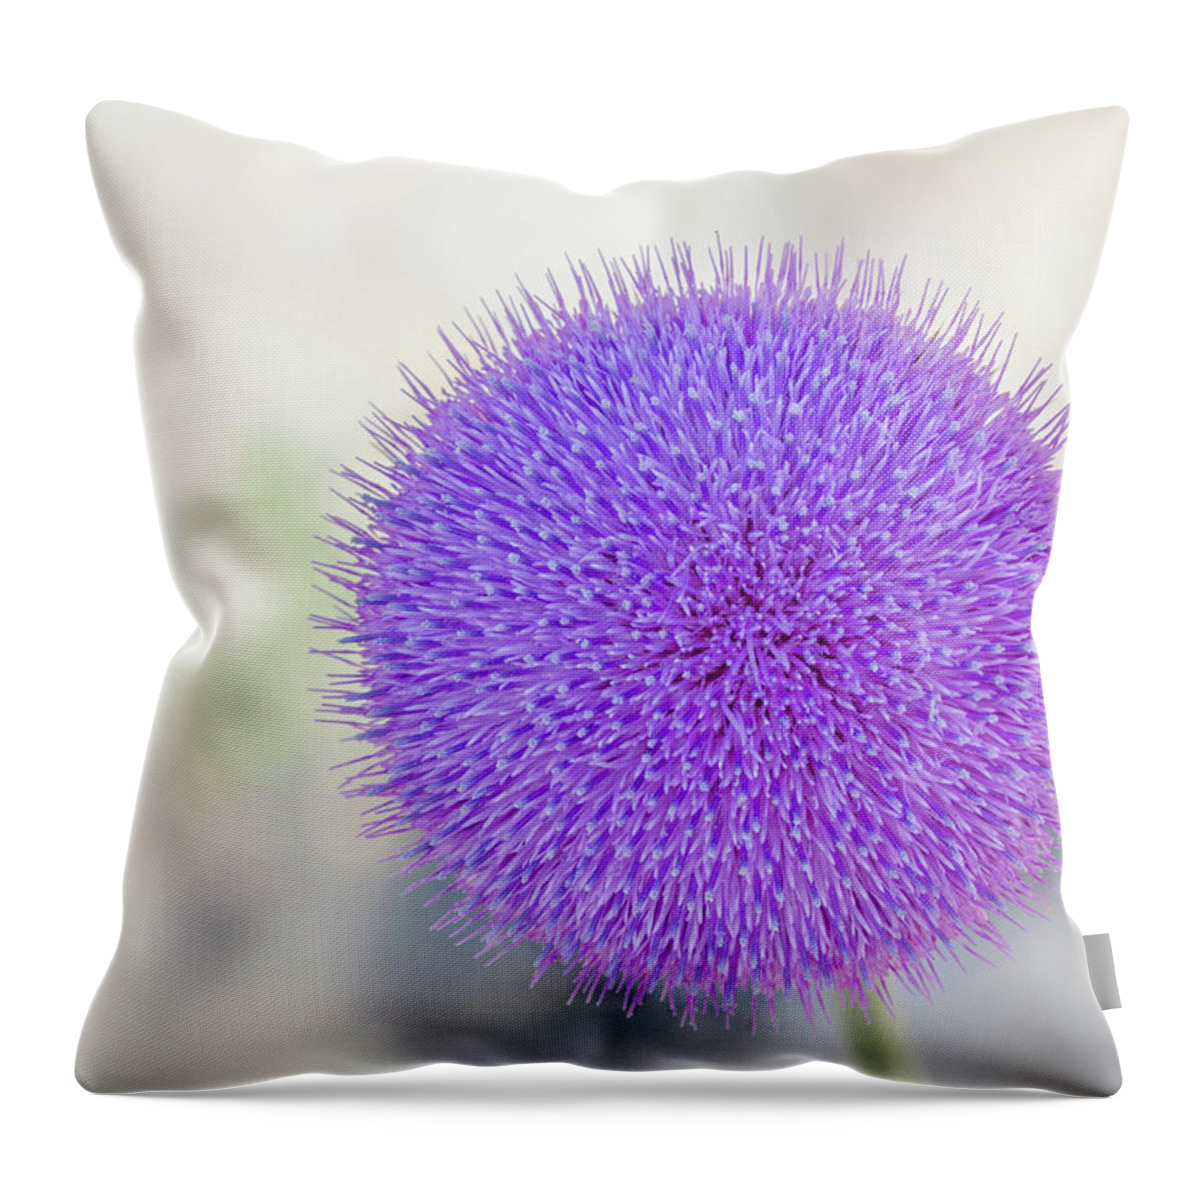 Scotch Throw Pillow featuring the photograph Scotch thistle by Rick Mosher